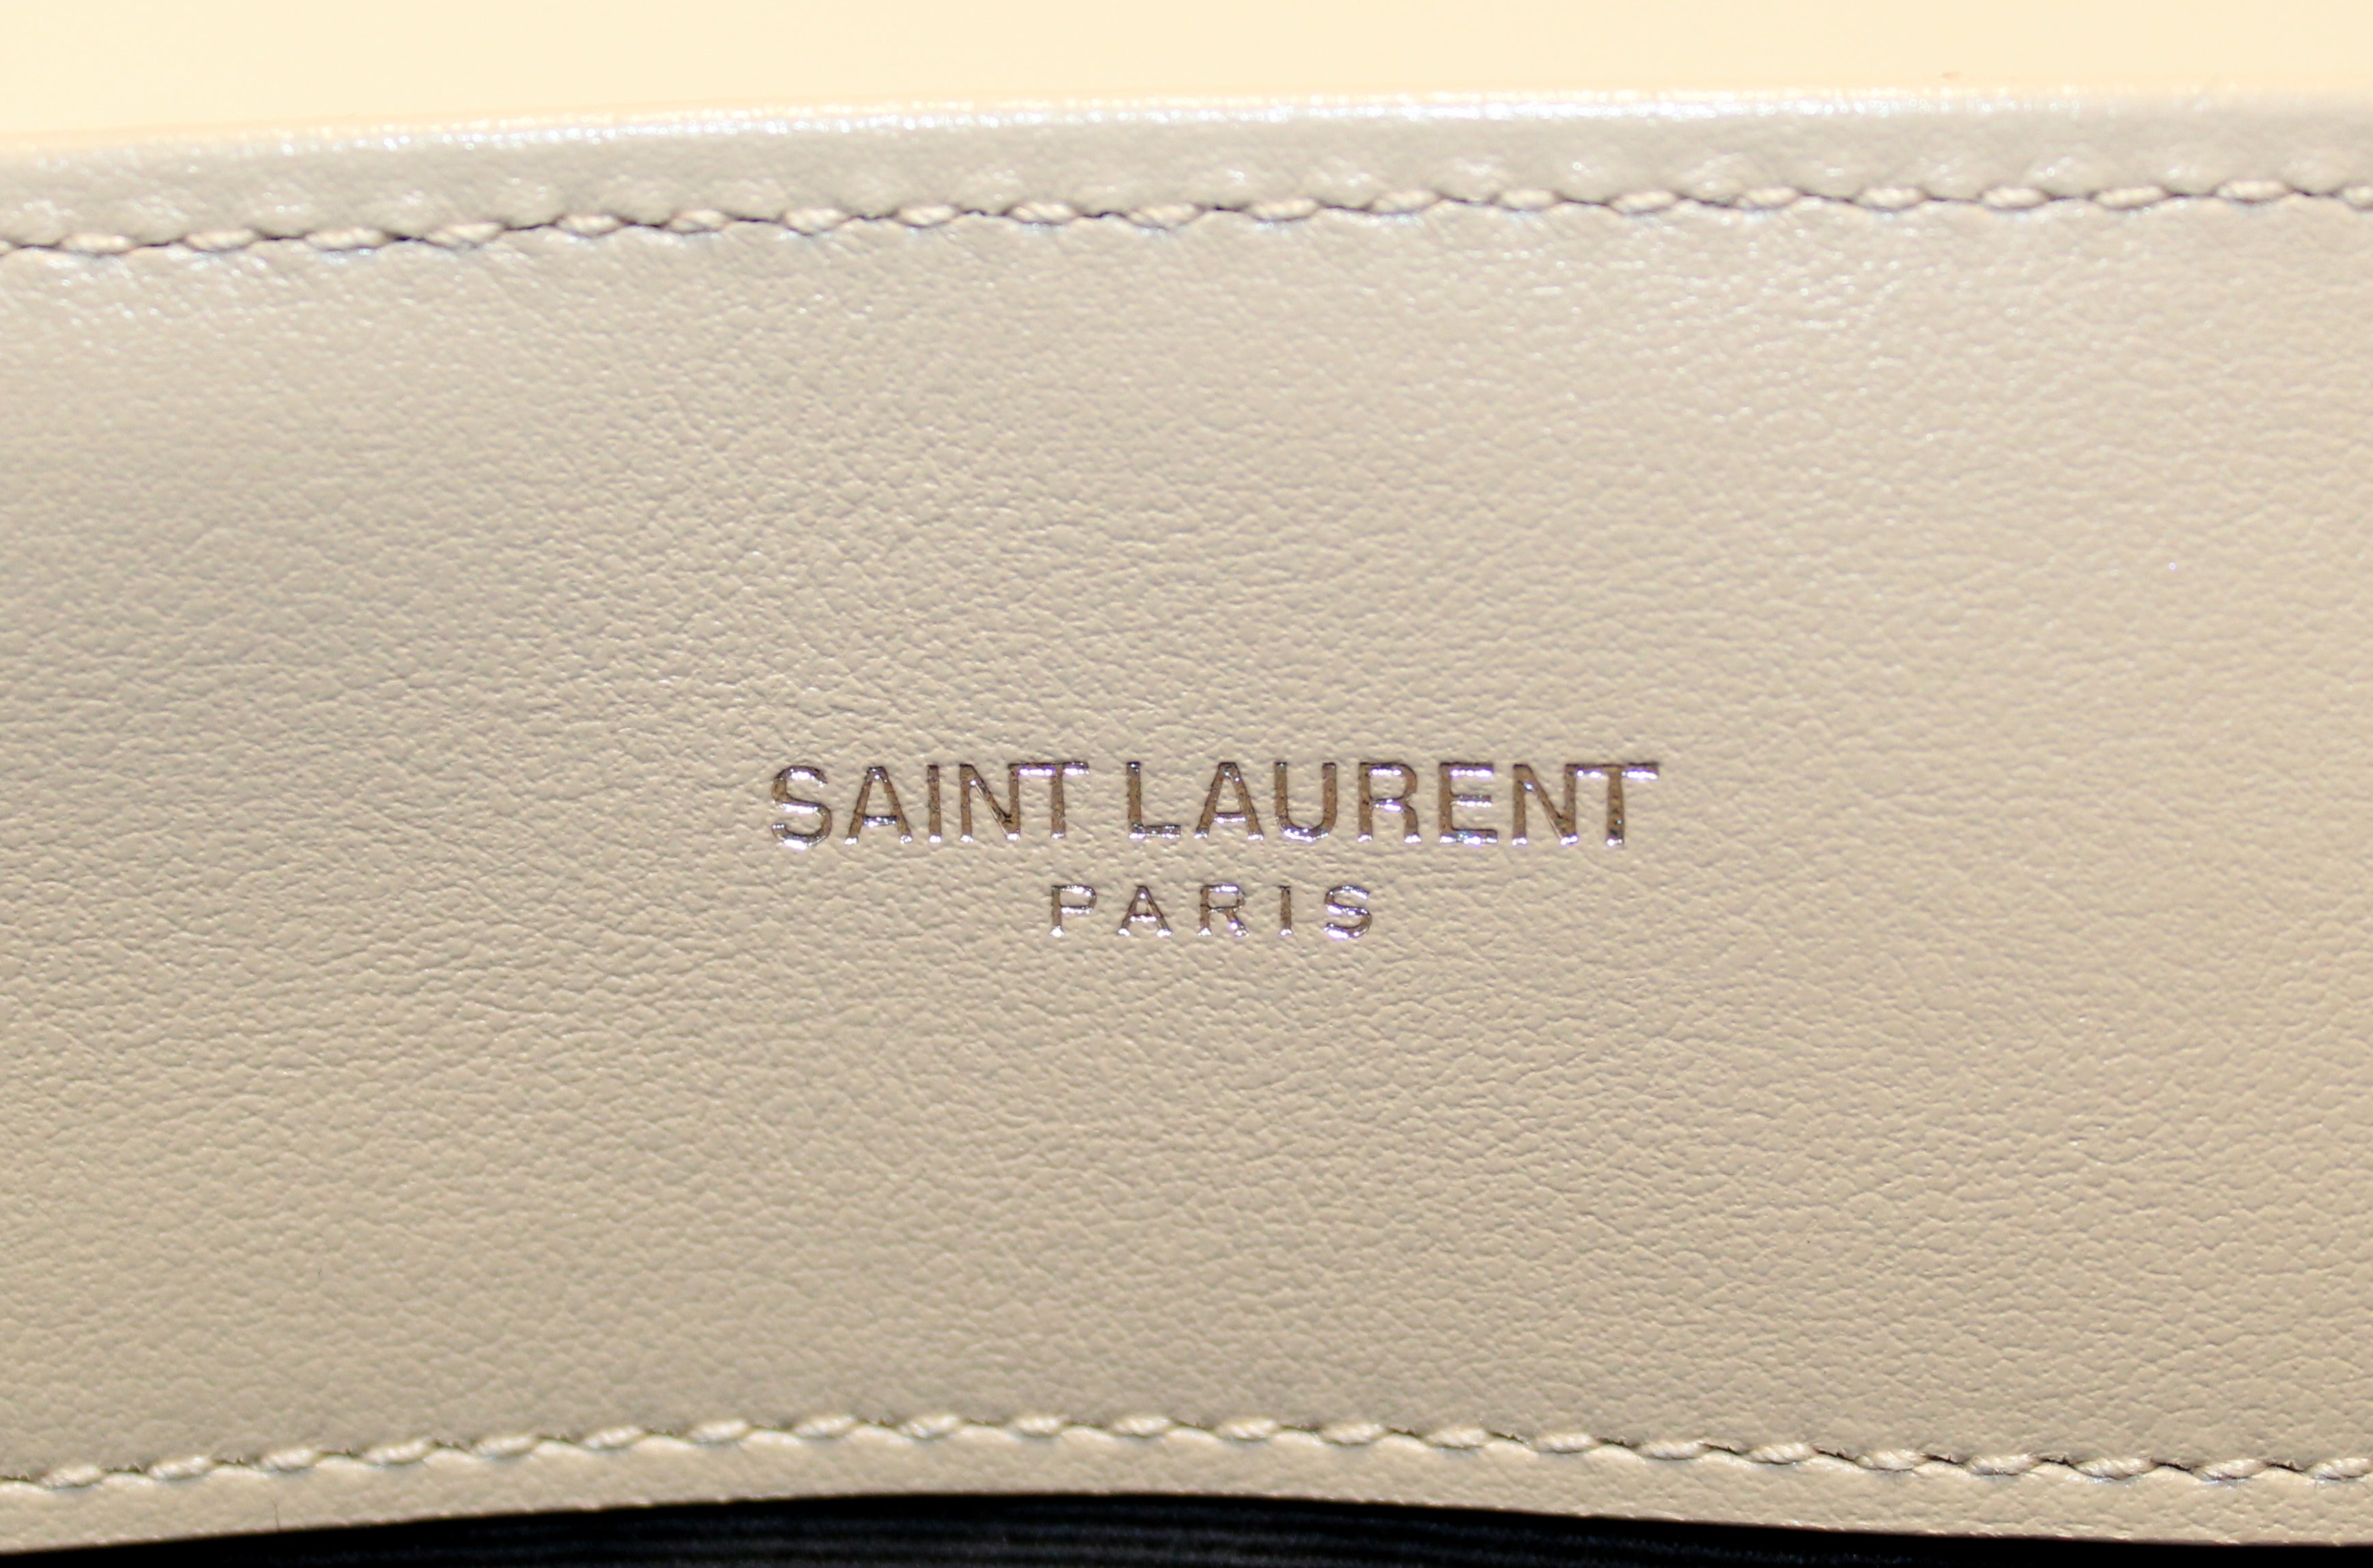 BACK IN STOCK ALERT! You've asked for it: Saint Laurent Loulou Medium  available now ⚡️ #LuxuryEveryday #SaintLaurent #CosetteAu